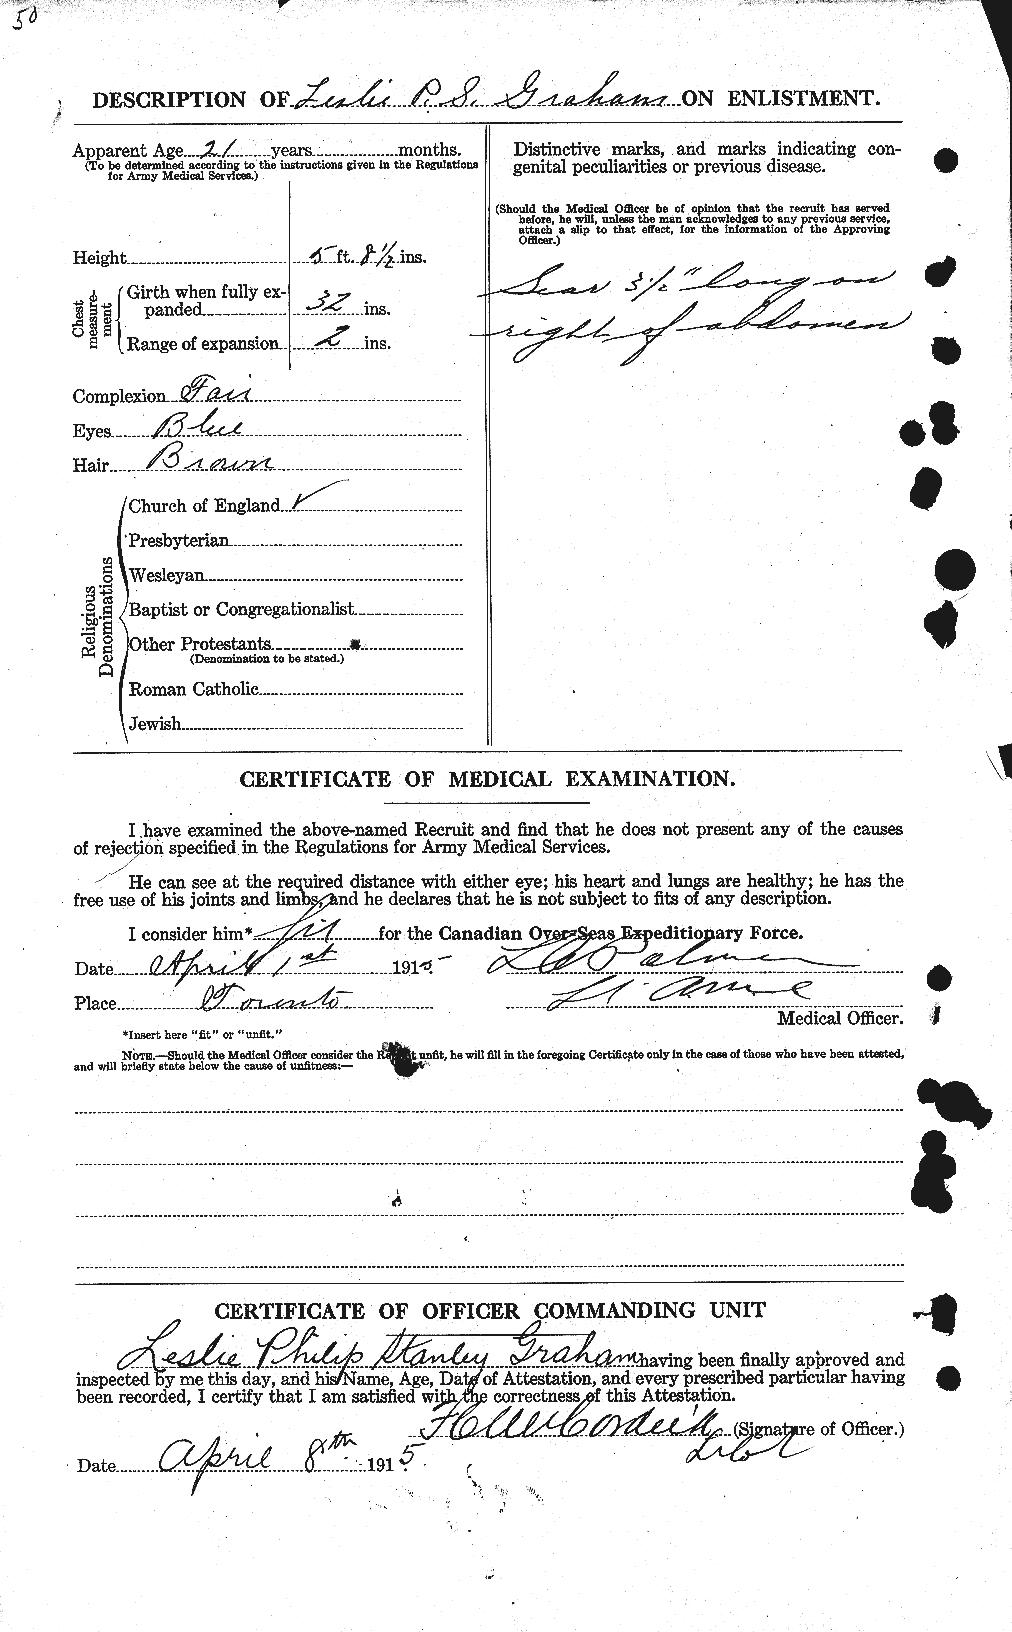 Personnel Records of the First World War - CEF 359271b